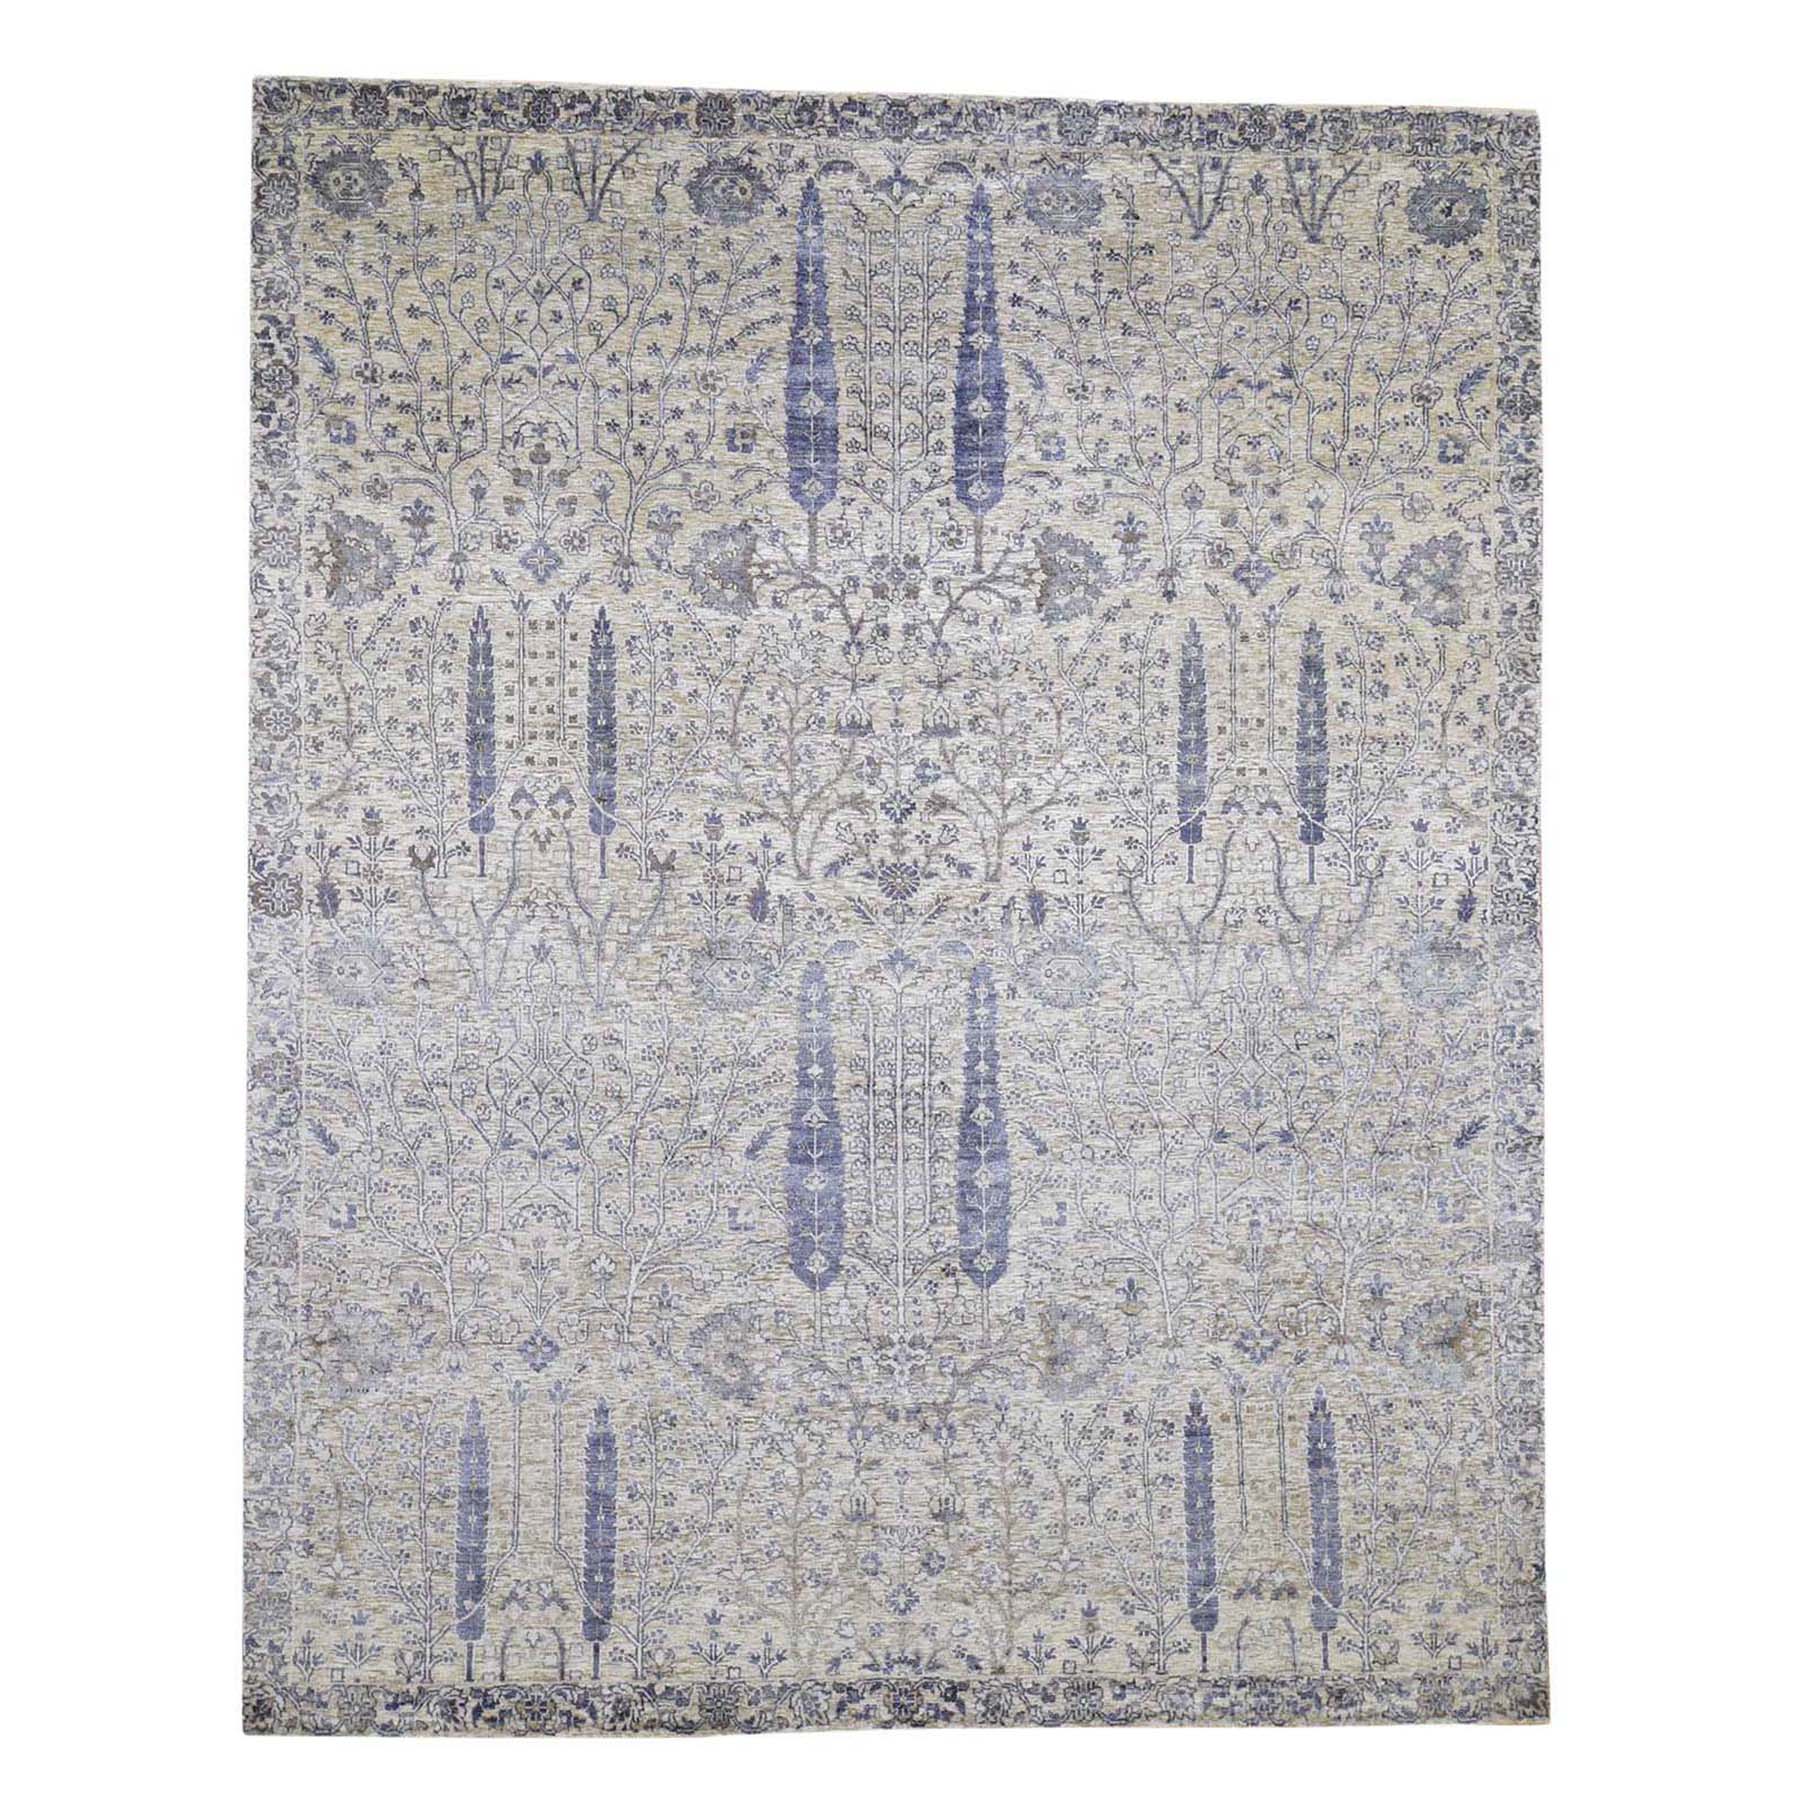 8'X10' Willow And Cypress Tree Design Silk With Textured Wool Hand-Knotted Oriental Rug moad6a78